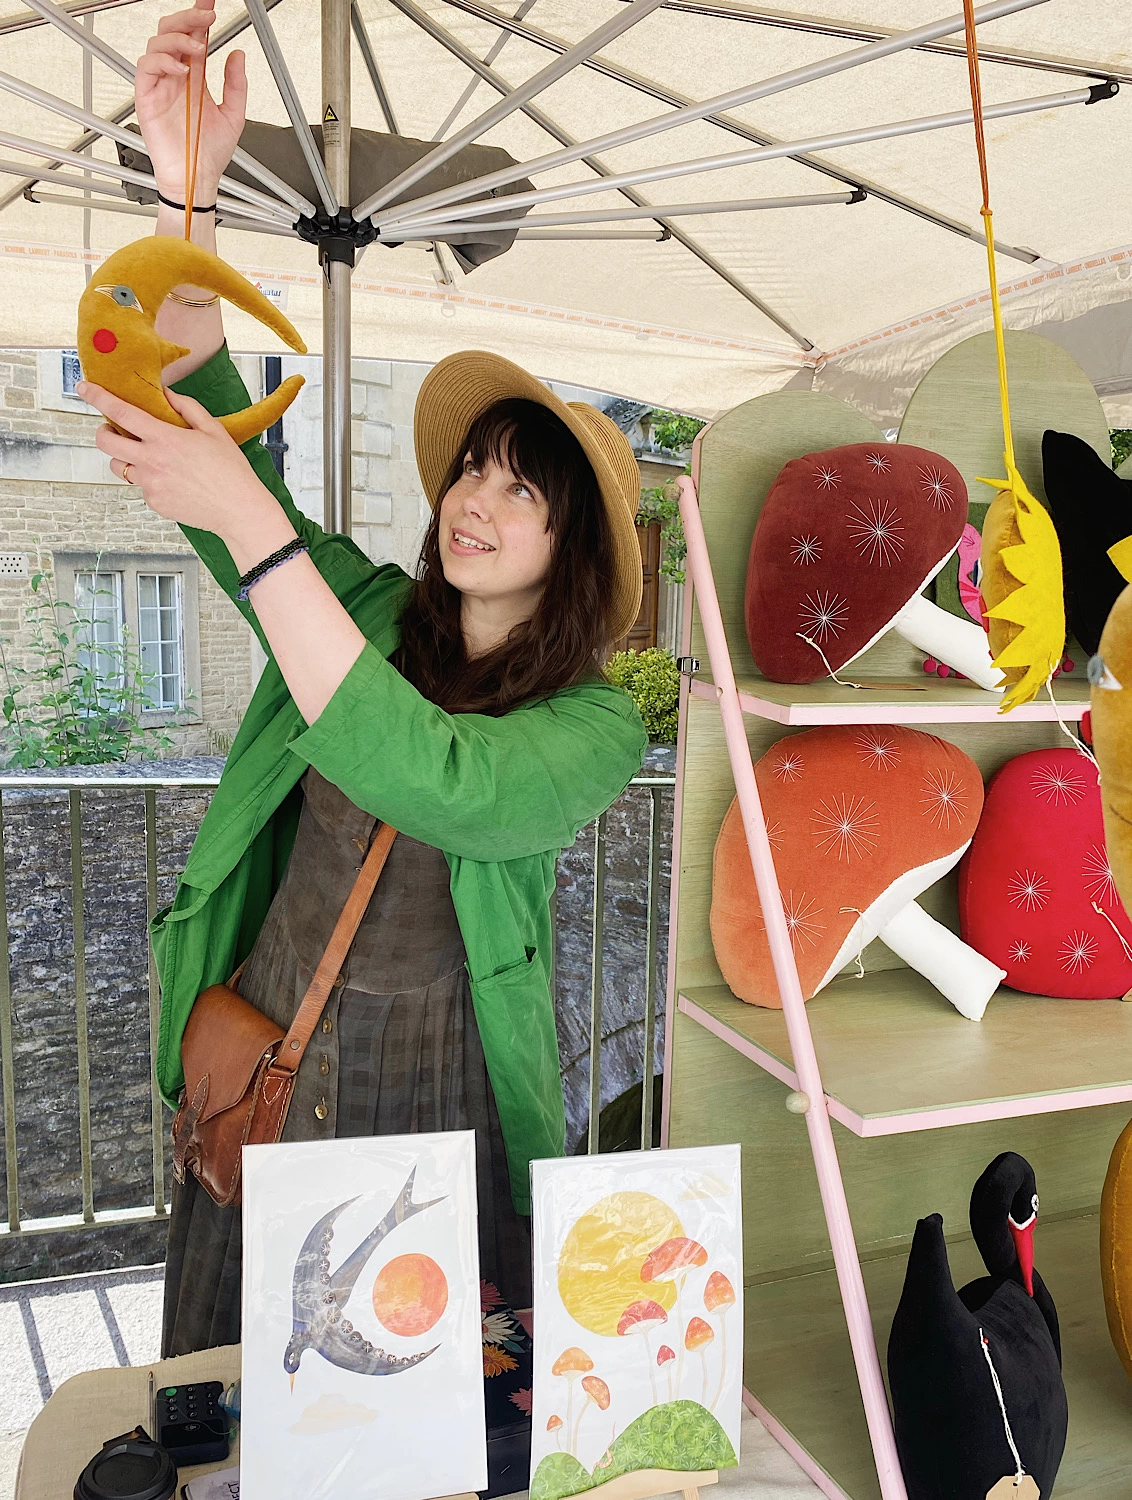 A dark haired, pale skinned woman in a hat and green jacket is standing behind a market stall full of brightly coloured cushions and artwork